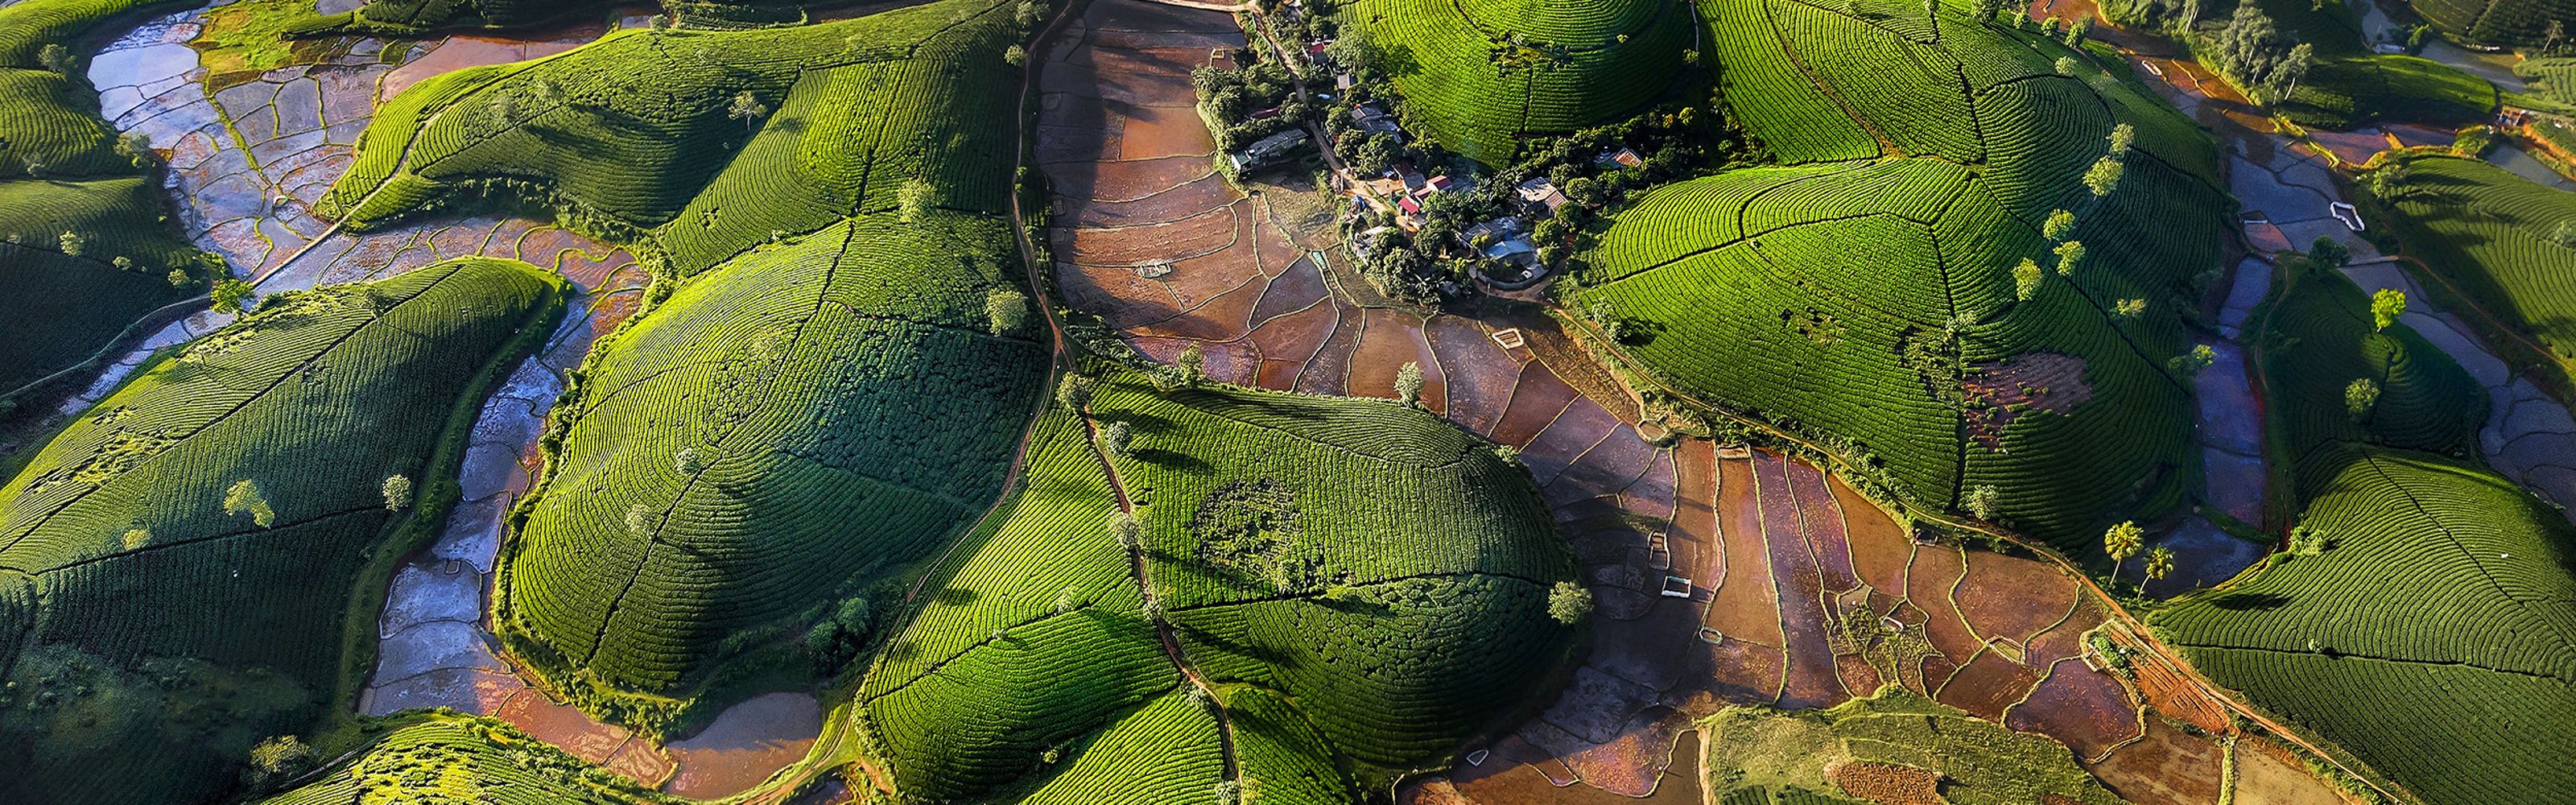 an aerial view of a hilly green tea plantation with high and low lying areas